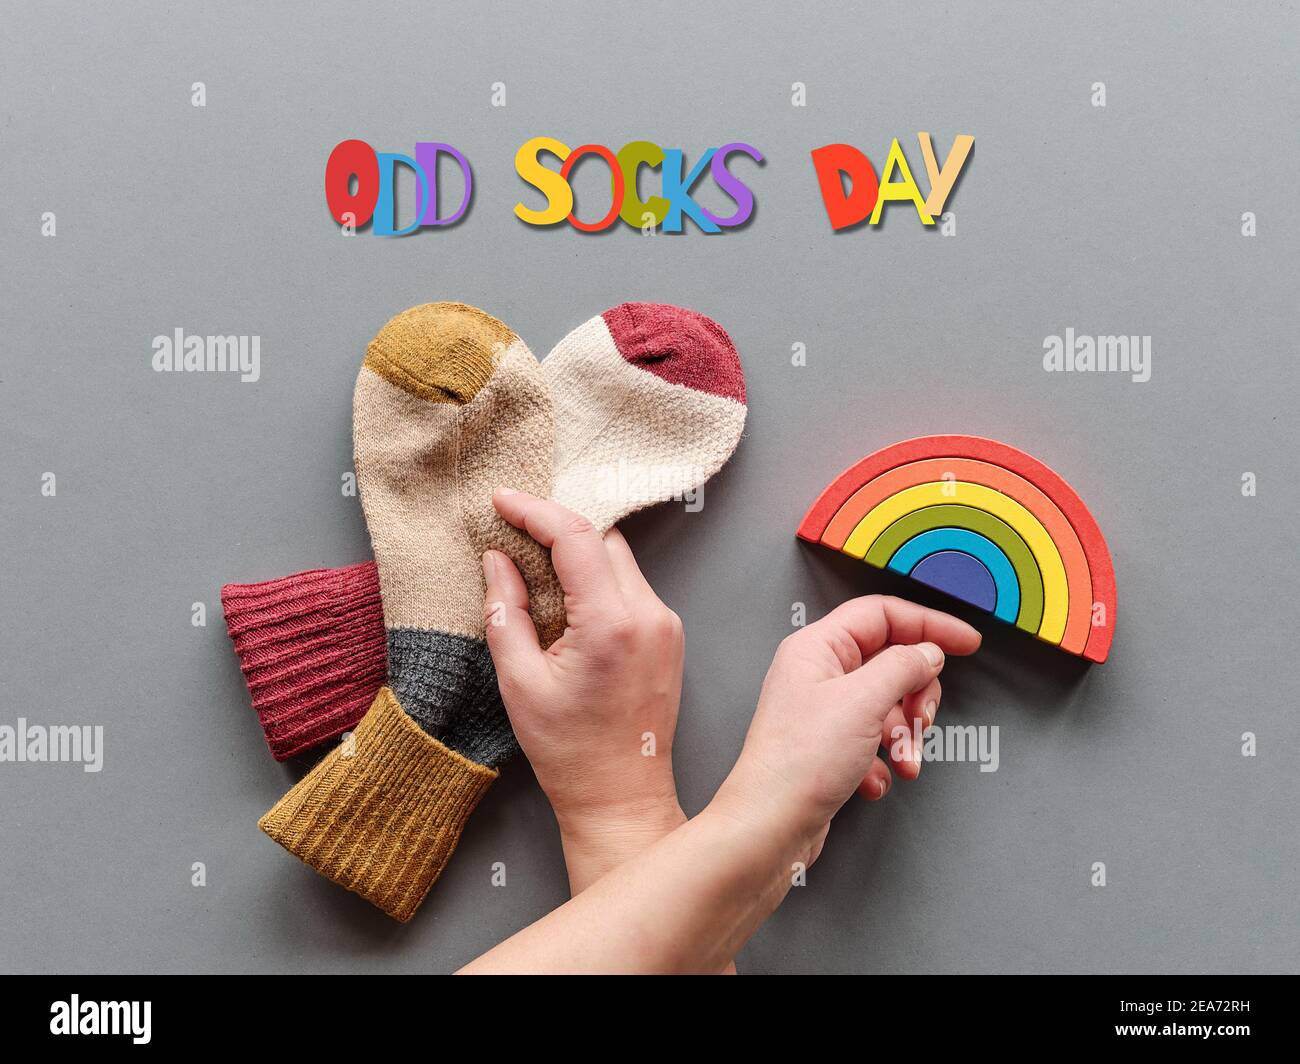 Odd Socks Day. Hand hold pair of mismatched socks. Wooden rainbow, toy  figures. Social initiative against bullying in school or workplace. Design  for Stock Photo - Alamy